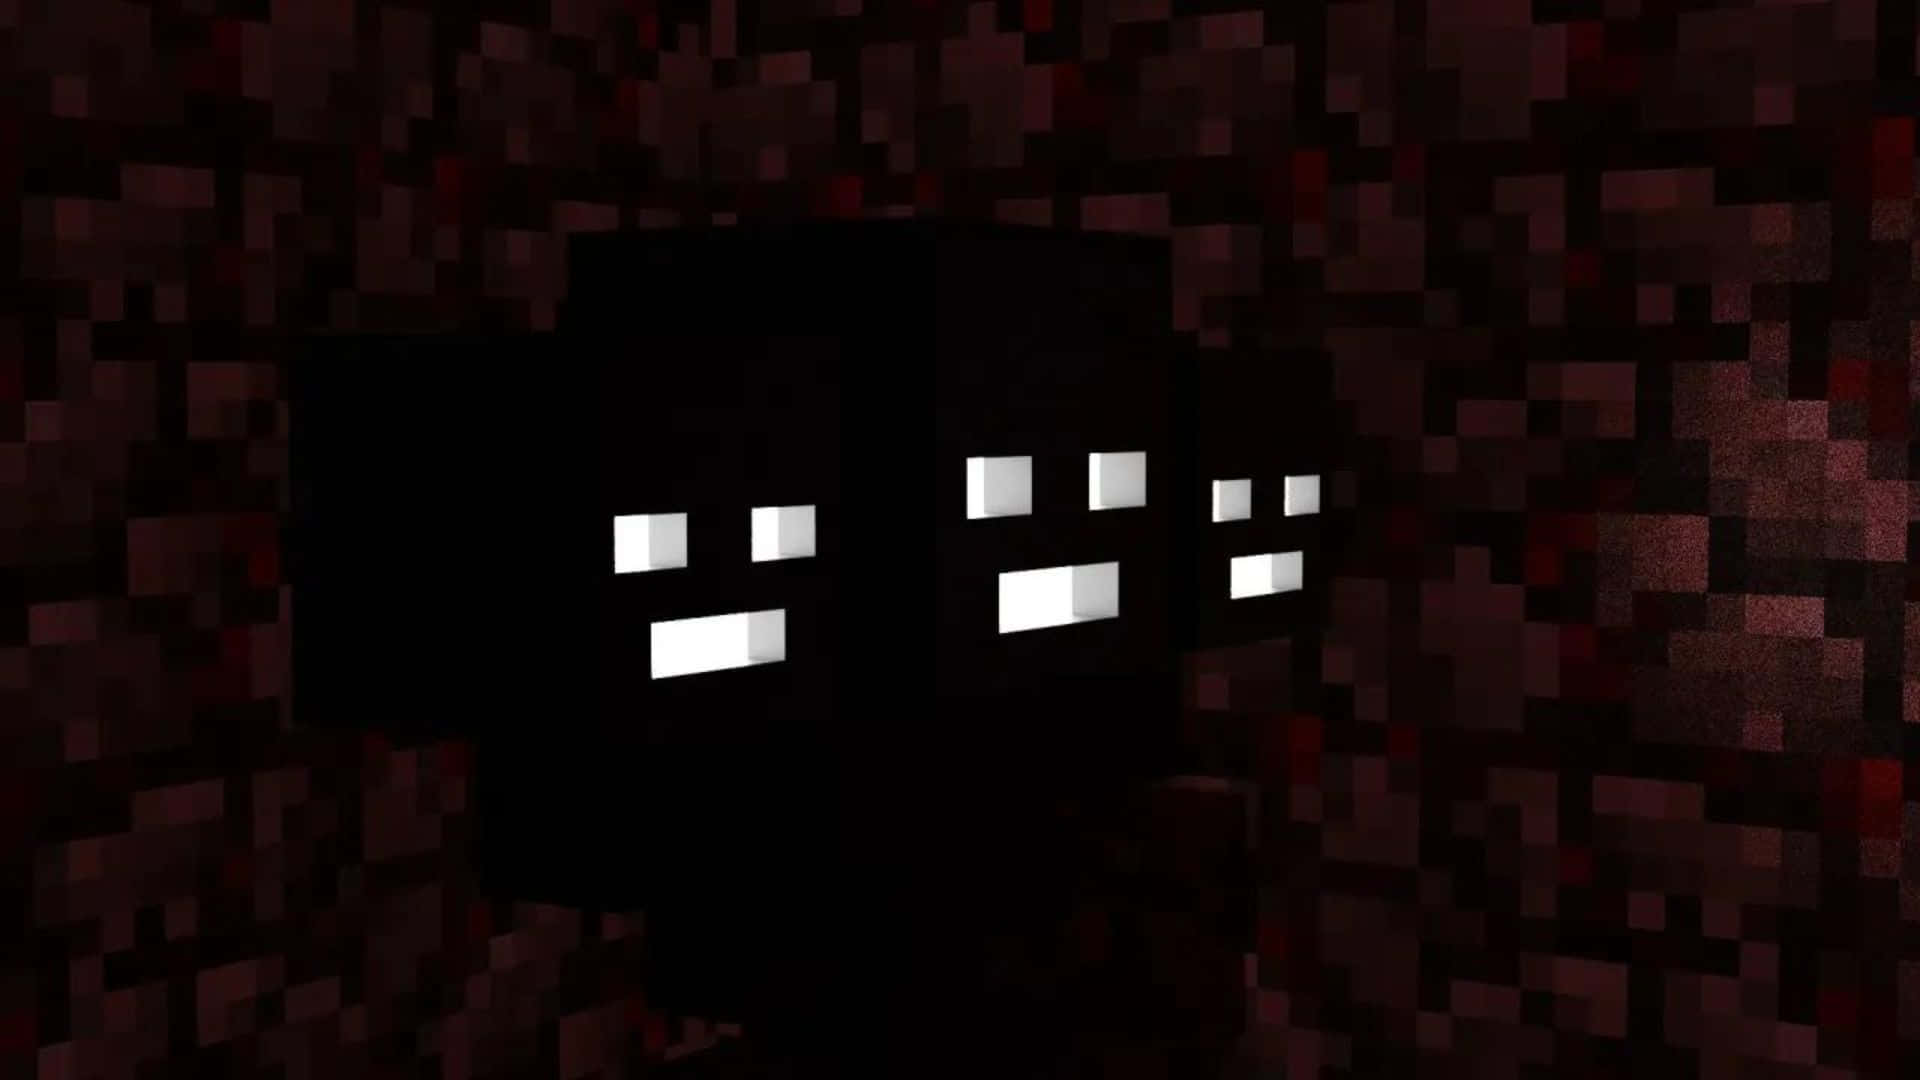 Minecraft's Wither Boss Looming in the Dark Wallpaper